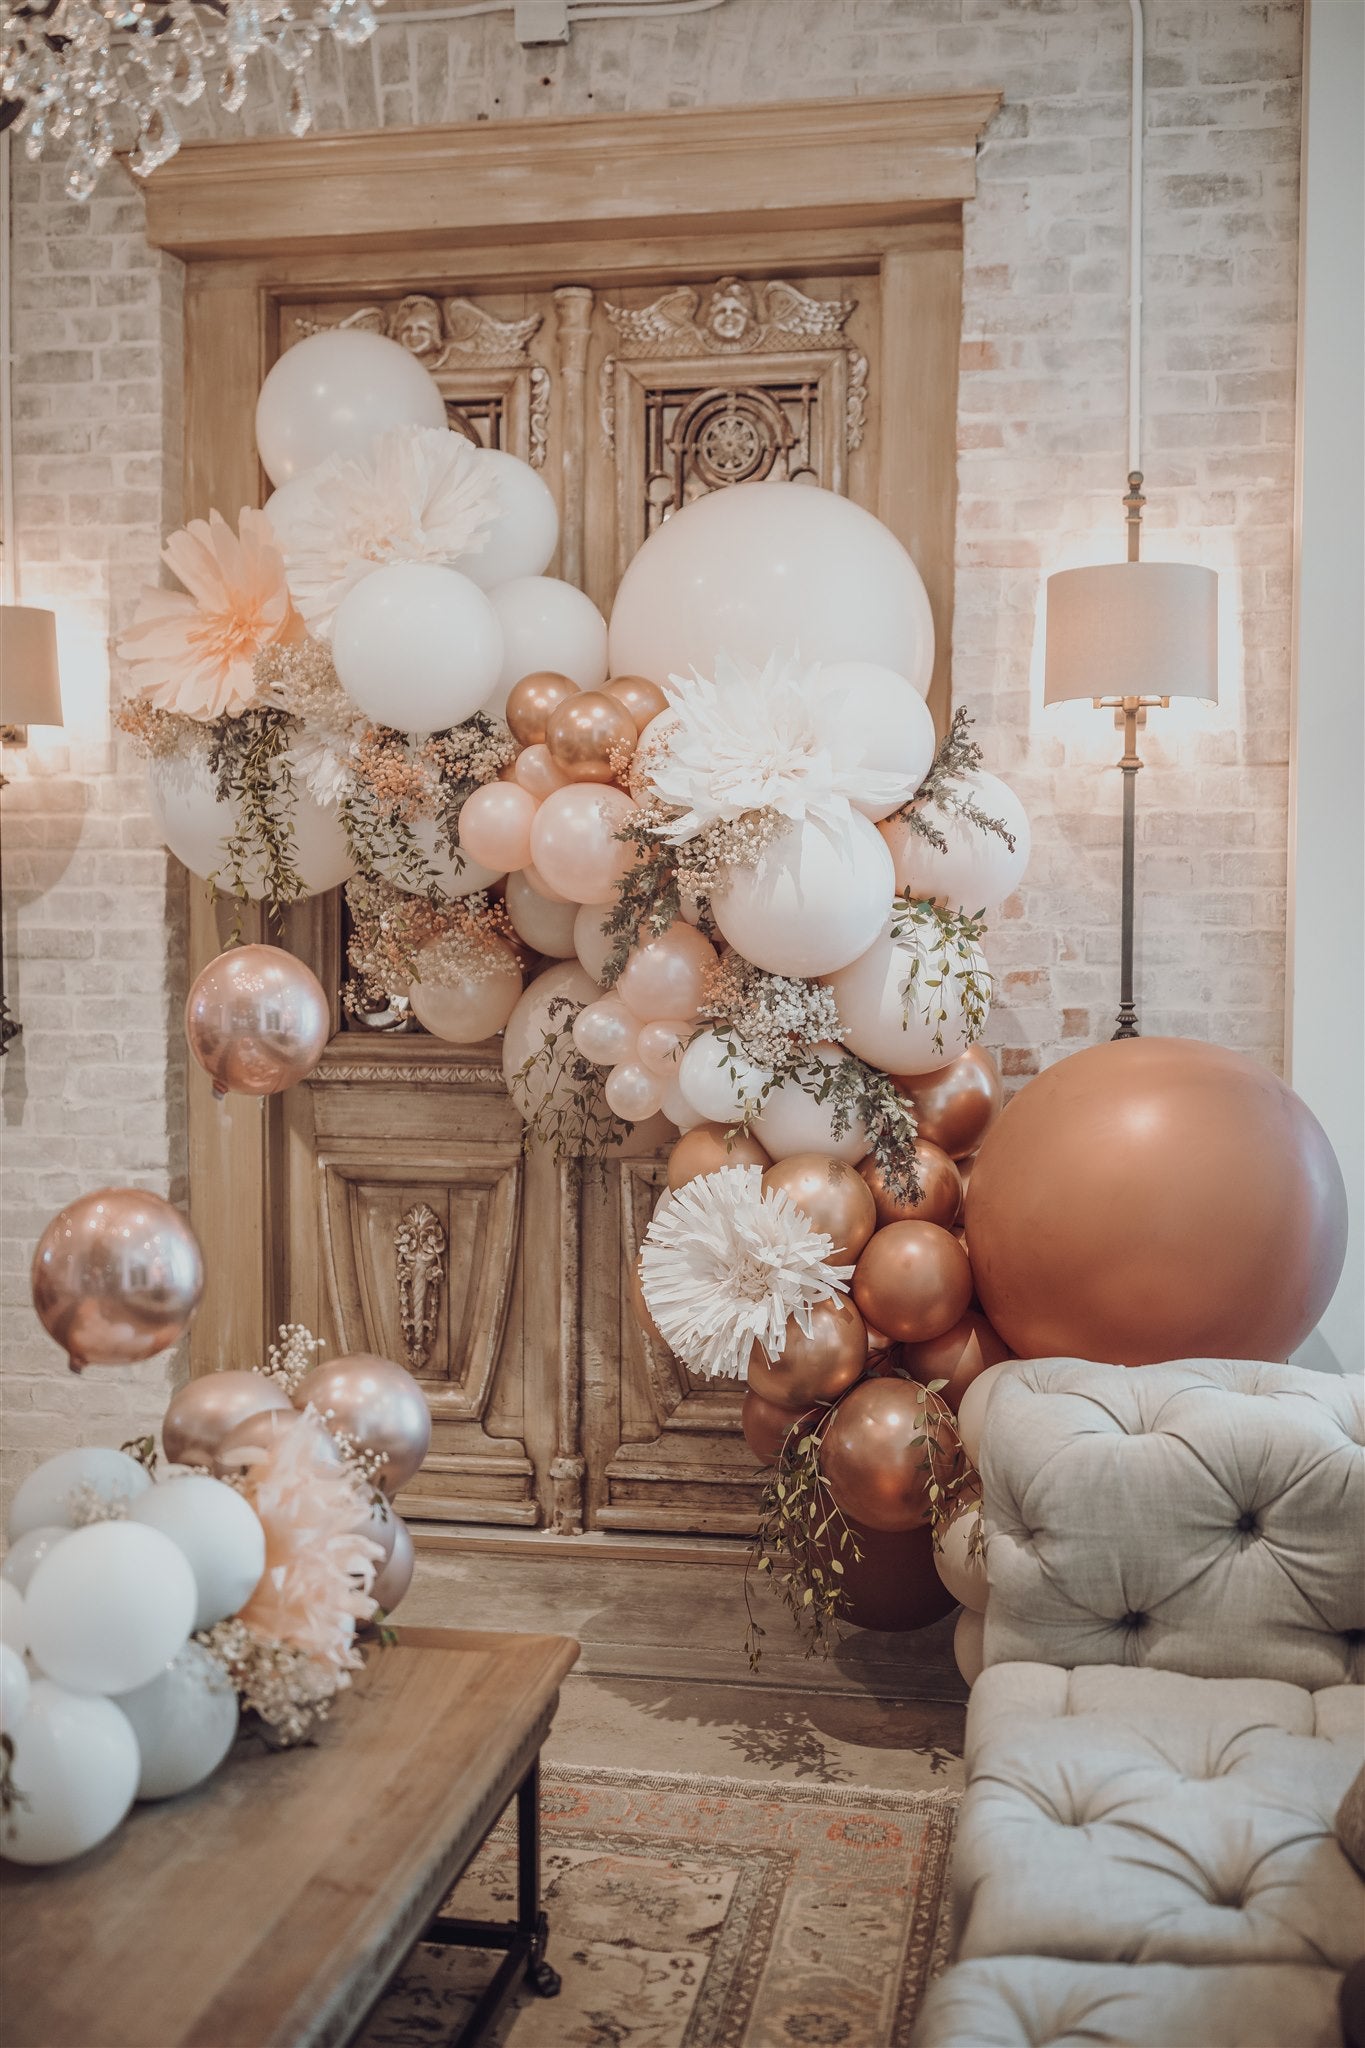 Revelry Goods Rose Gold, Neutral, Blush Balloons with Fresh Floral Houston, TX